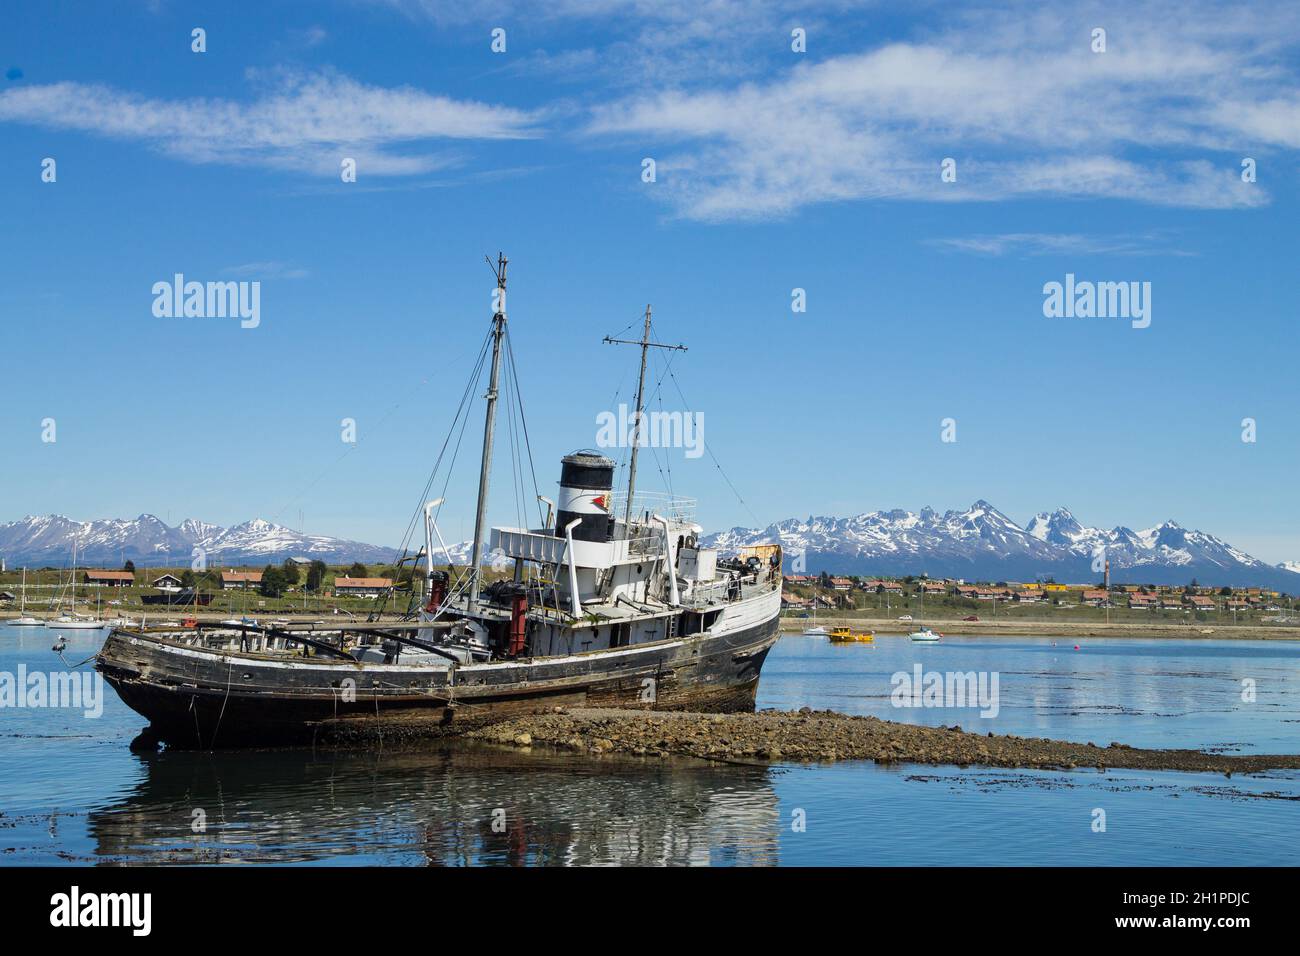 Southernmost city in the world. Beached ship on Ushuaia port, Argentina landscape Stock Photo